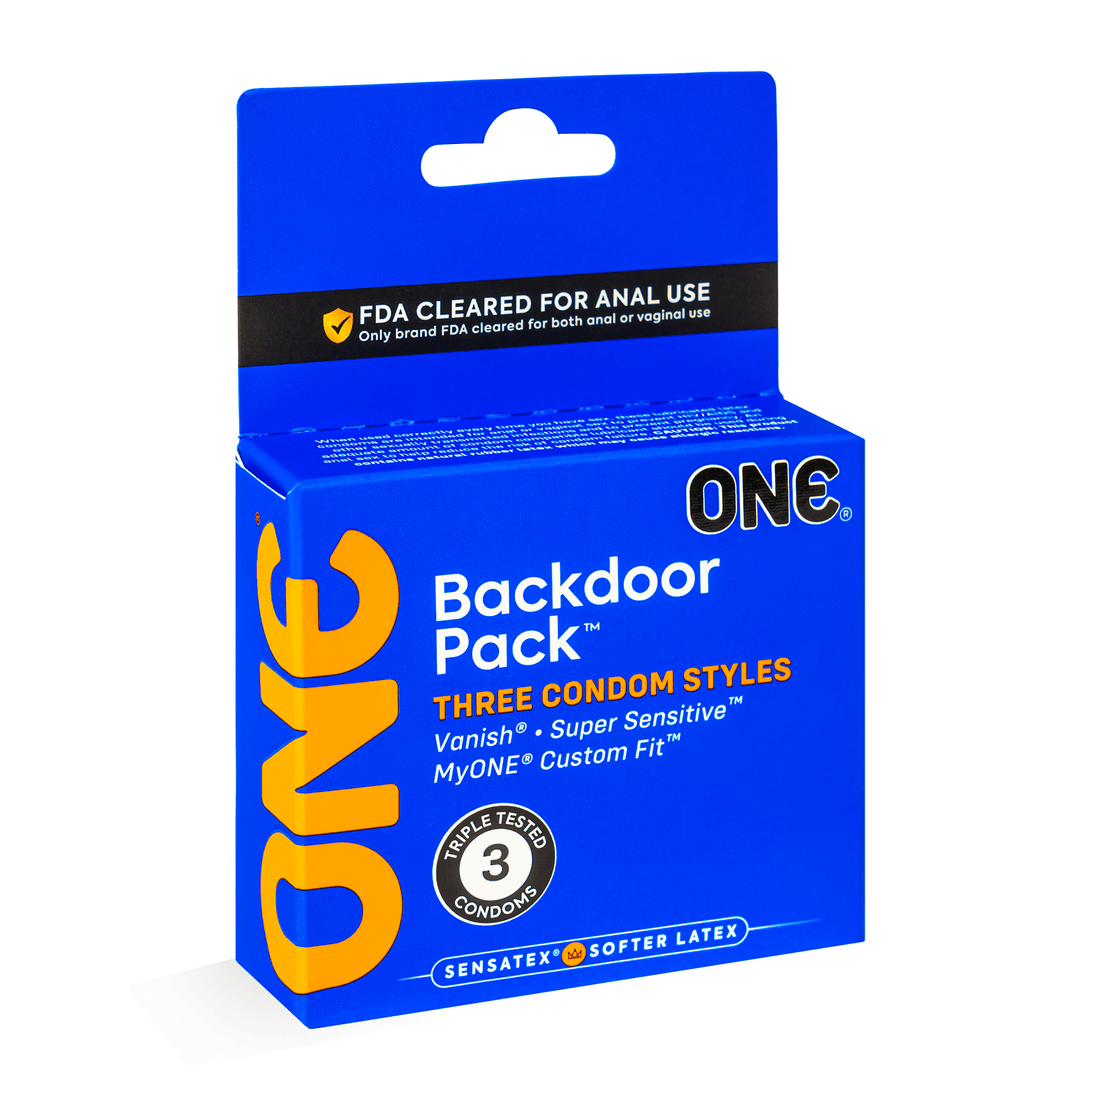 The ONE Backdoor Pack is now at Walmart! - ONE®